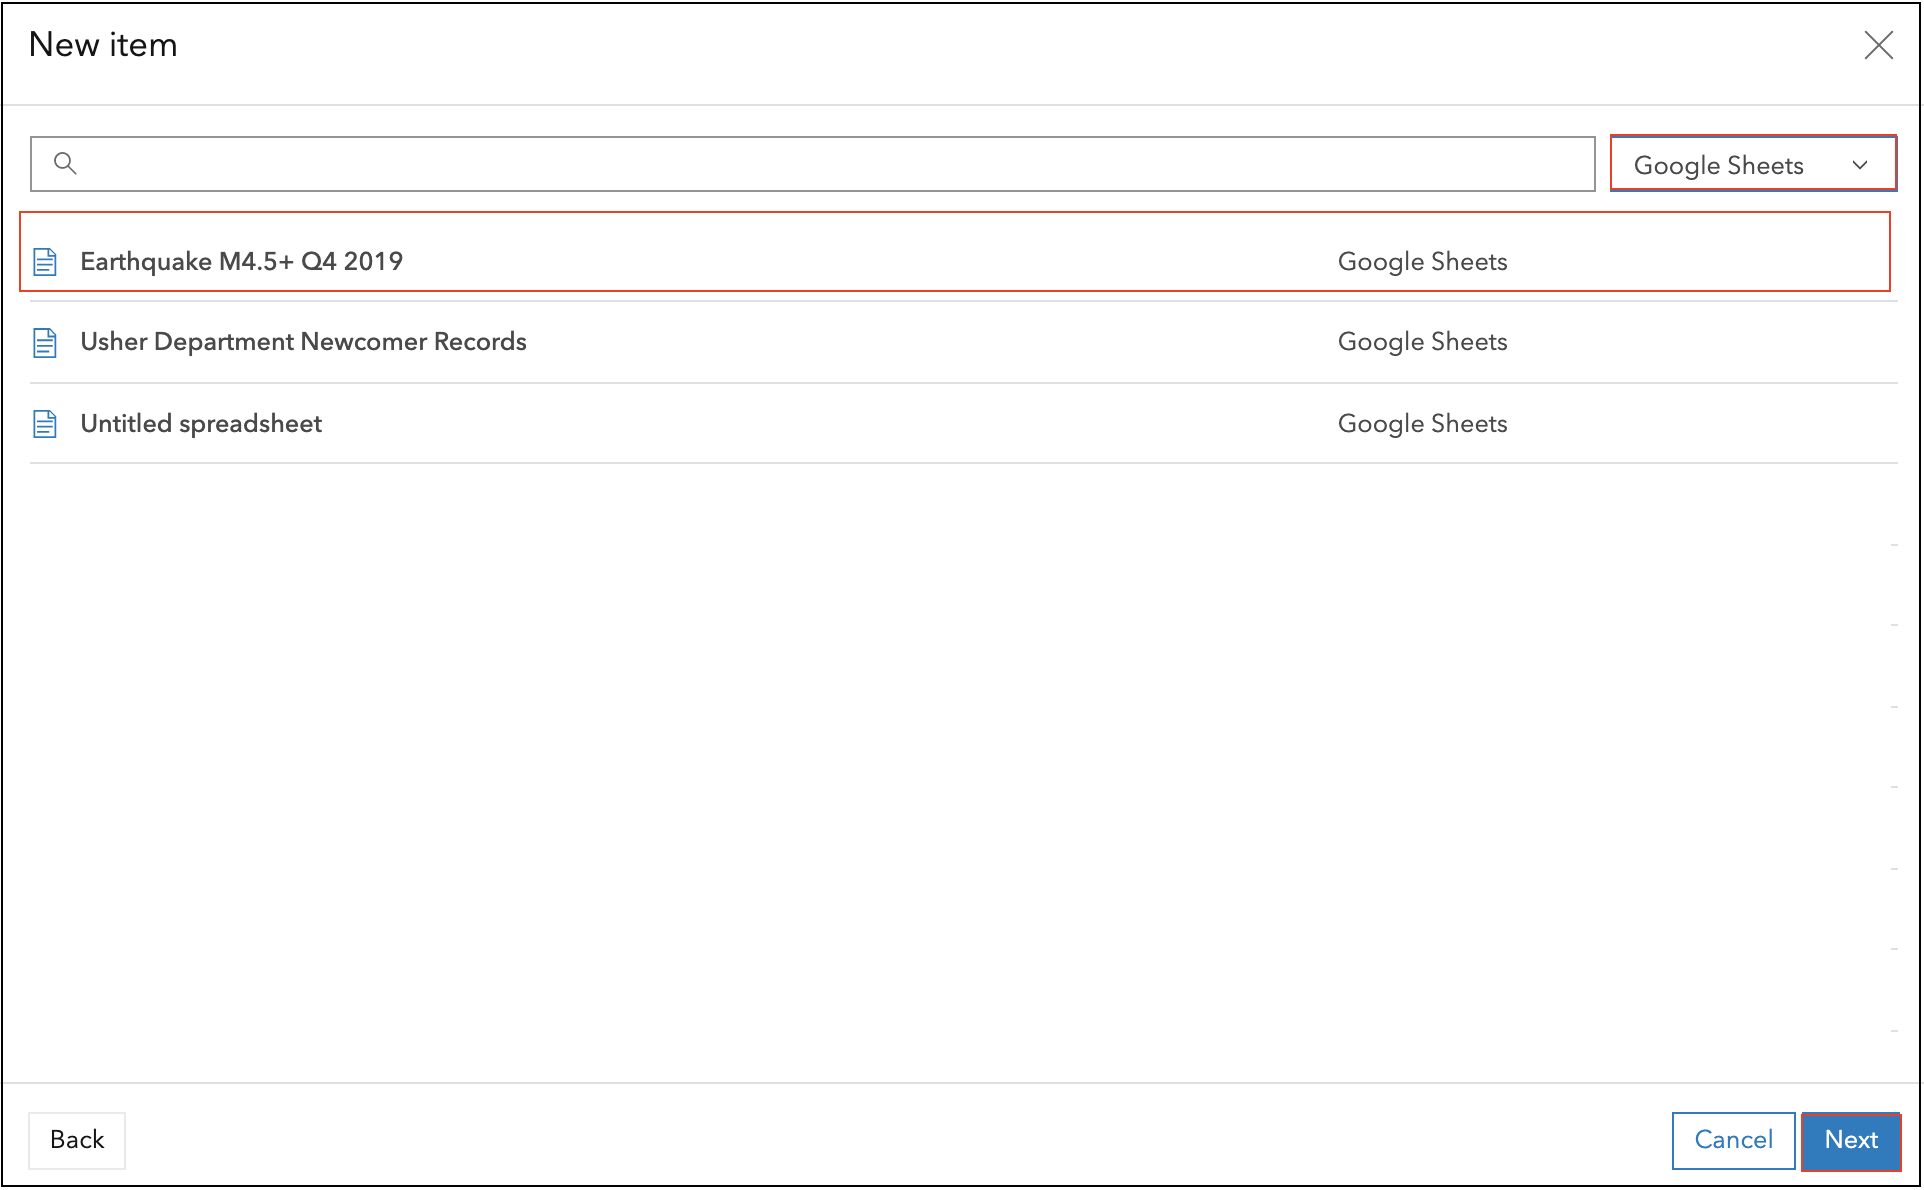 The New item window displaying the Google Sheets options.